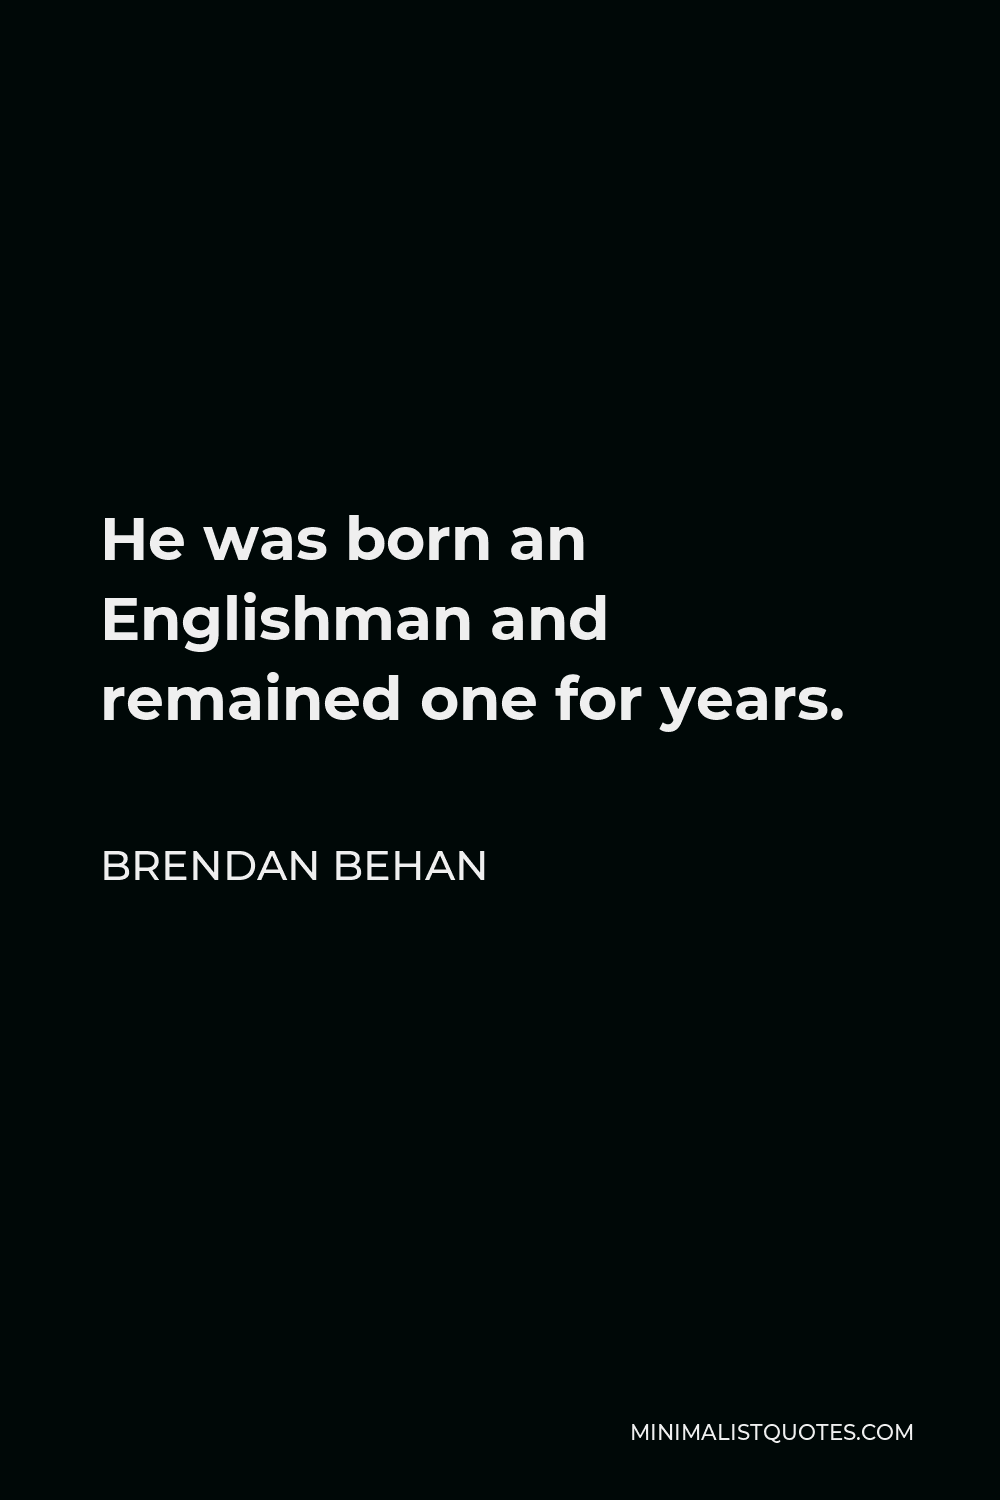 Brendan Behan Quote - He was born an Englishman and remained one for years.